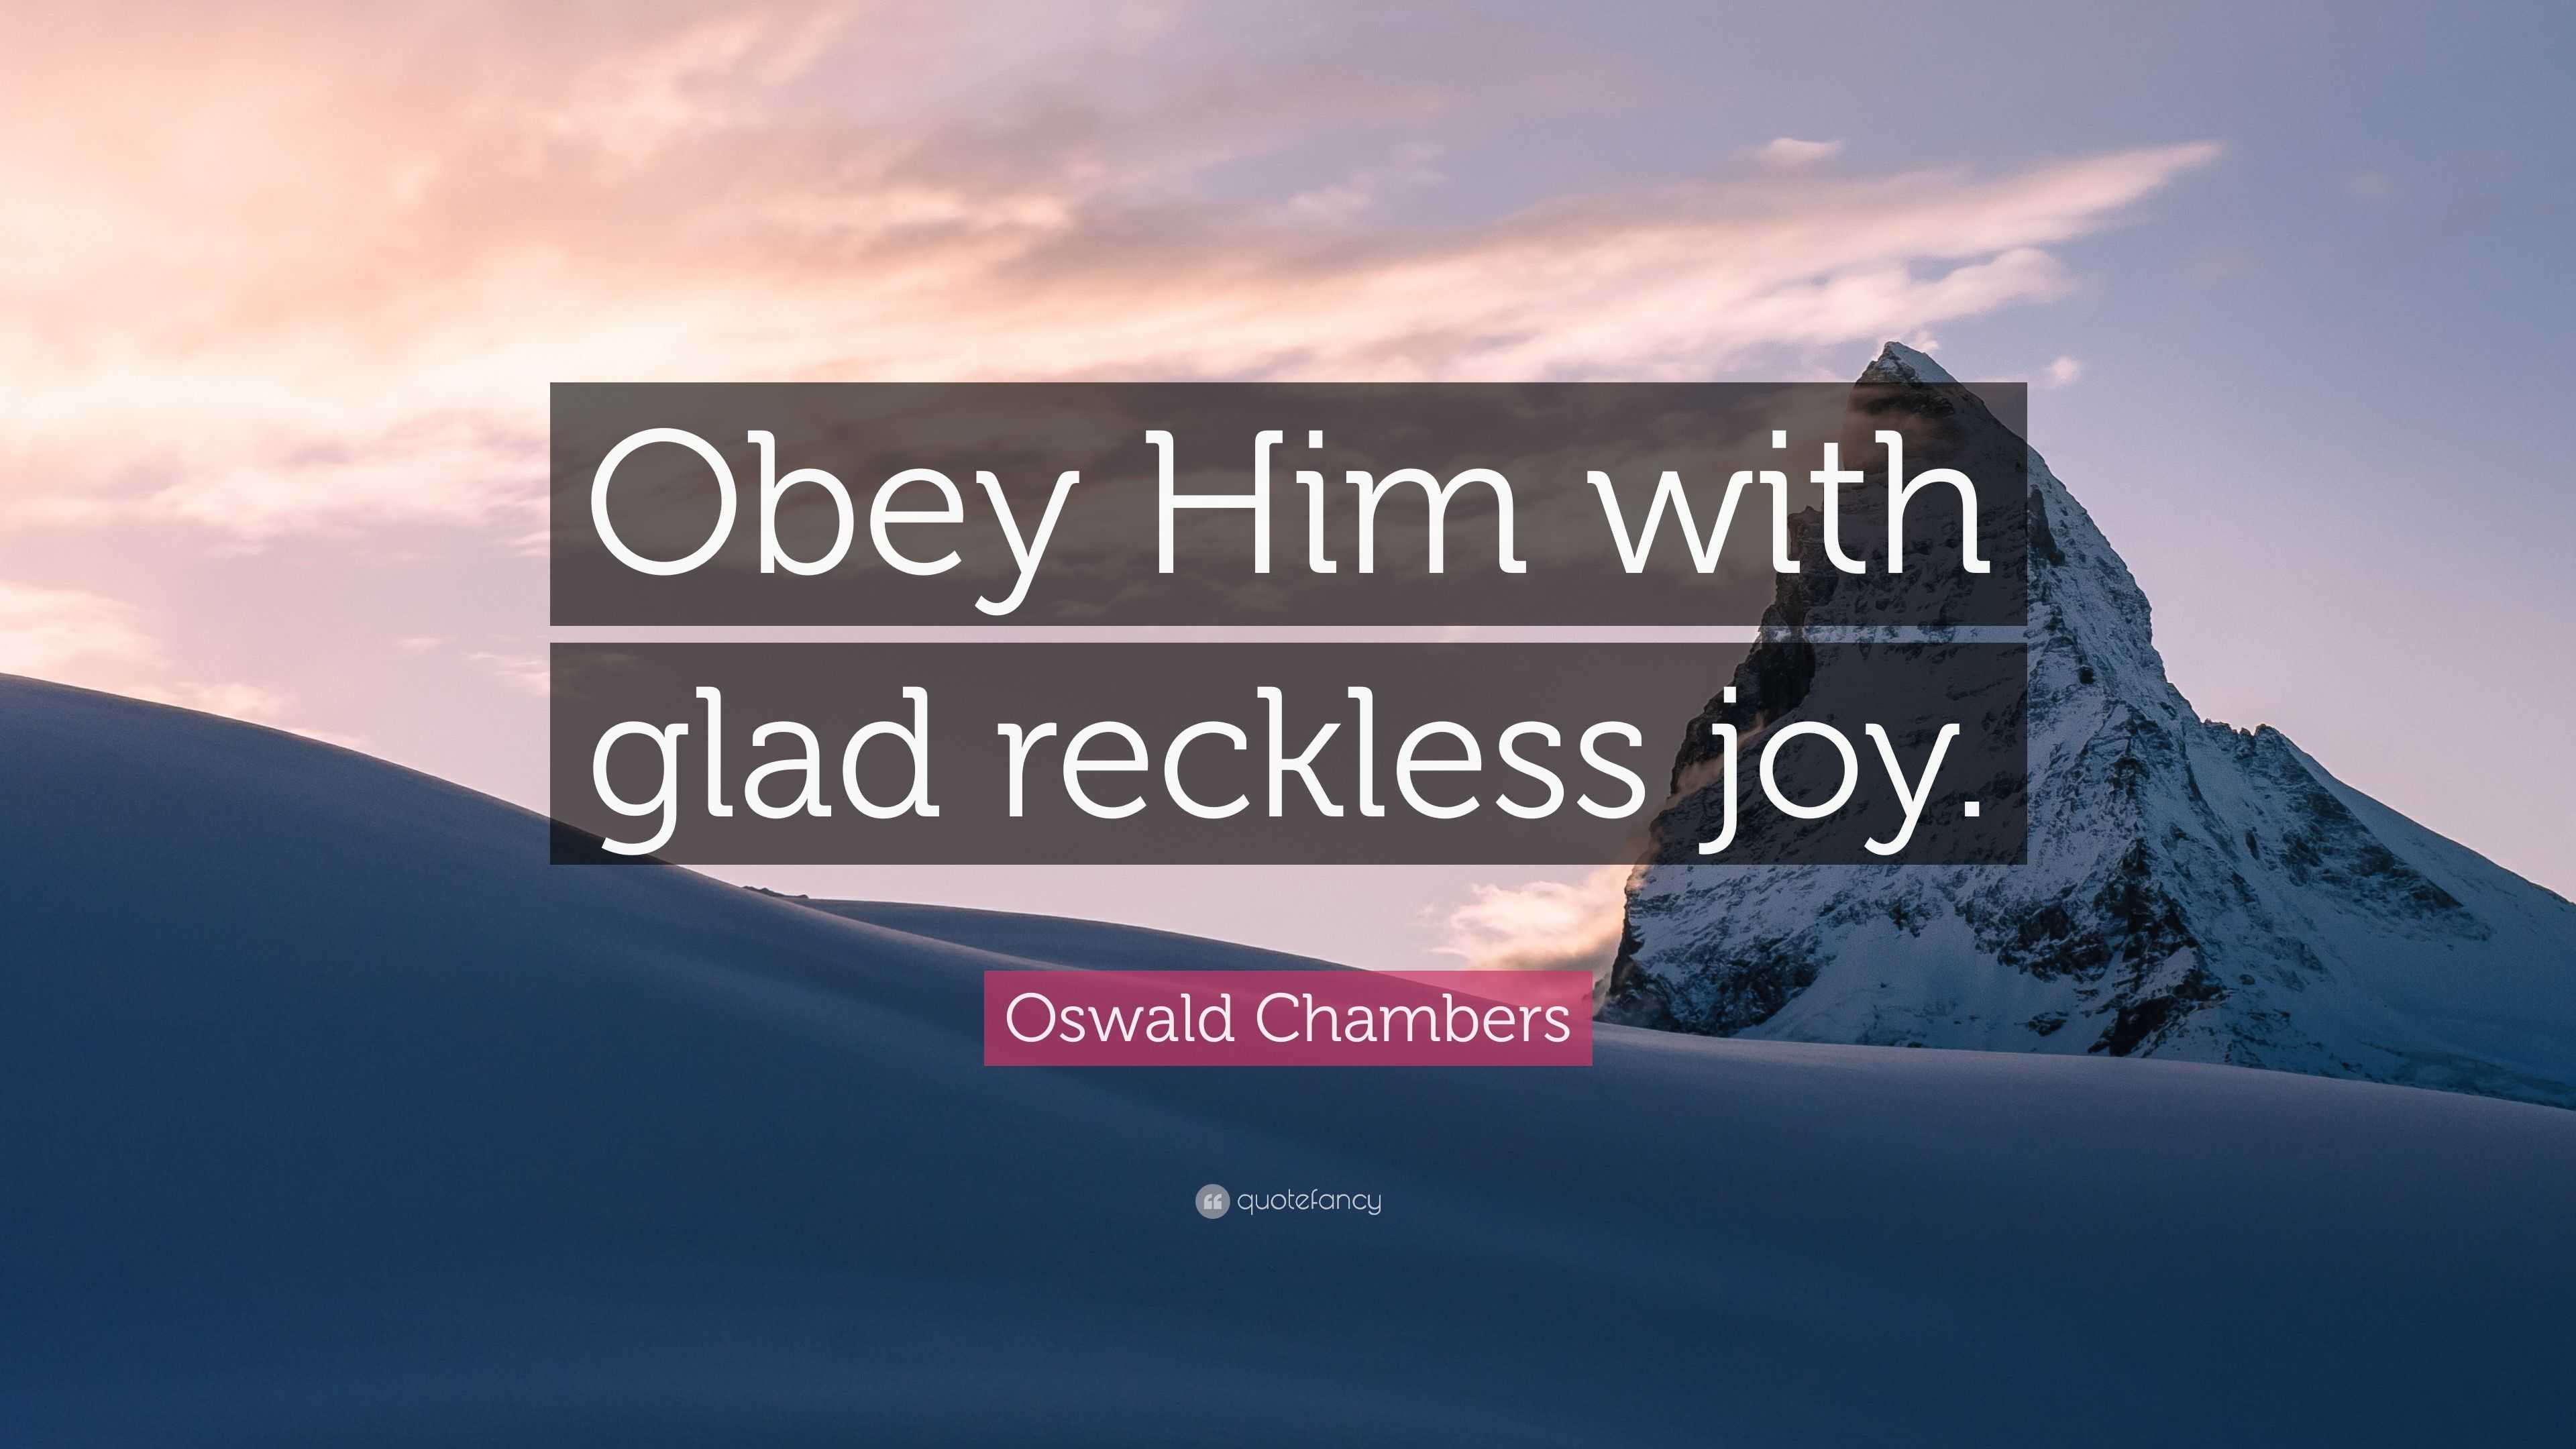 4791159 Oswald Chambers Quote Obey Him with glad reckless joy